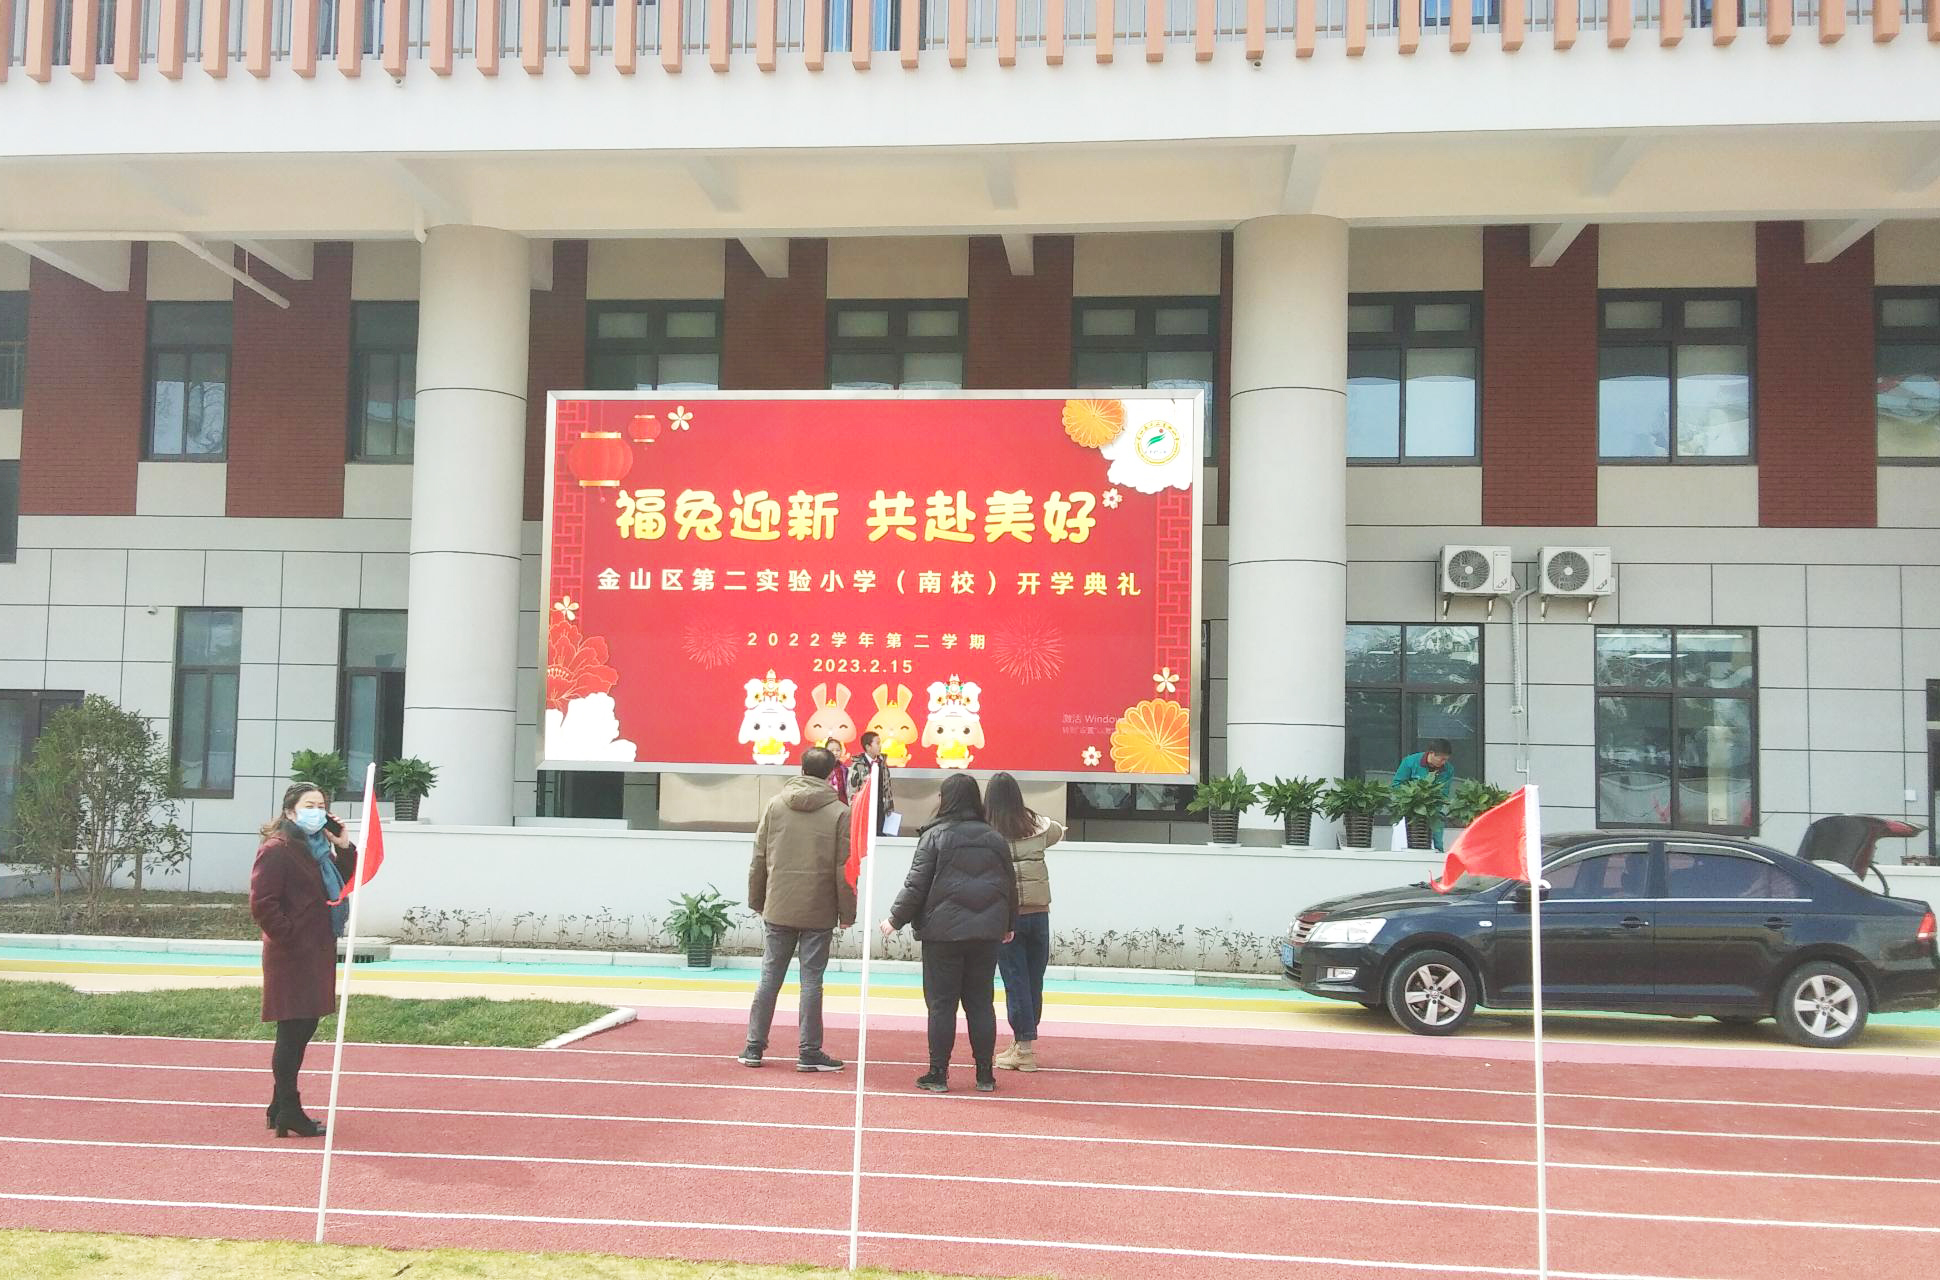 A quality LX series LED screen in Jinshan No2 Experimental Primary School